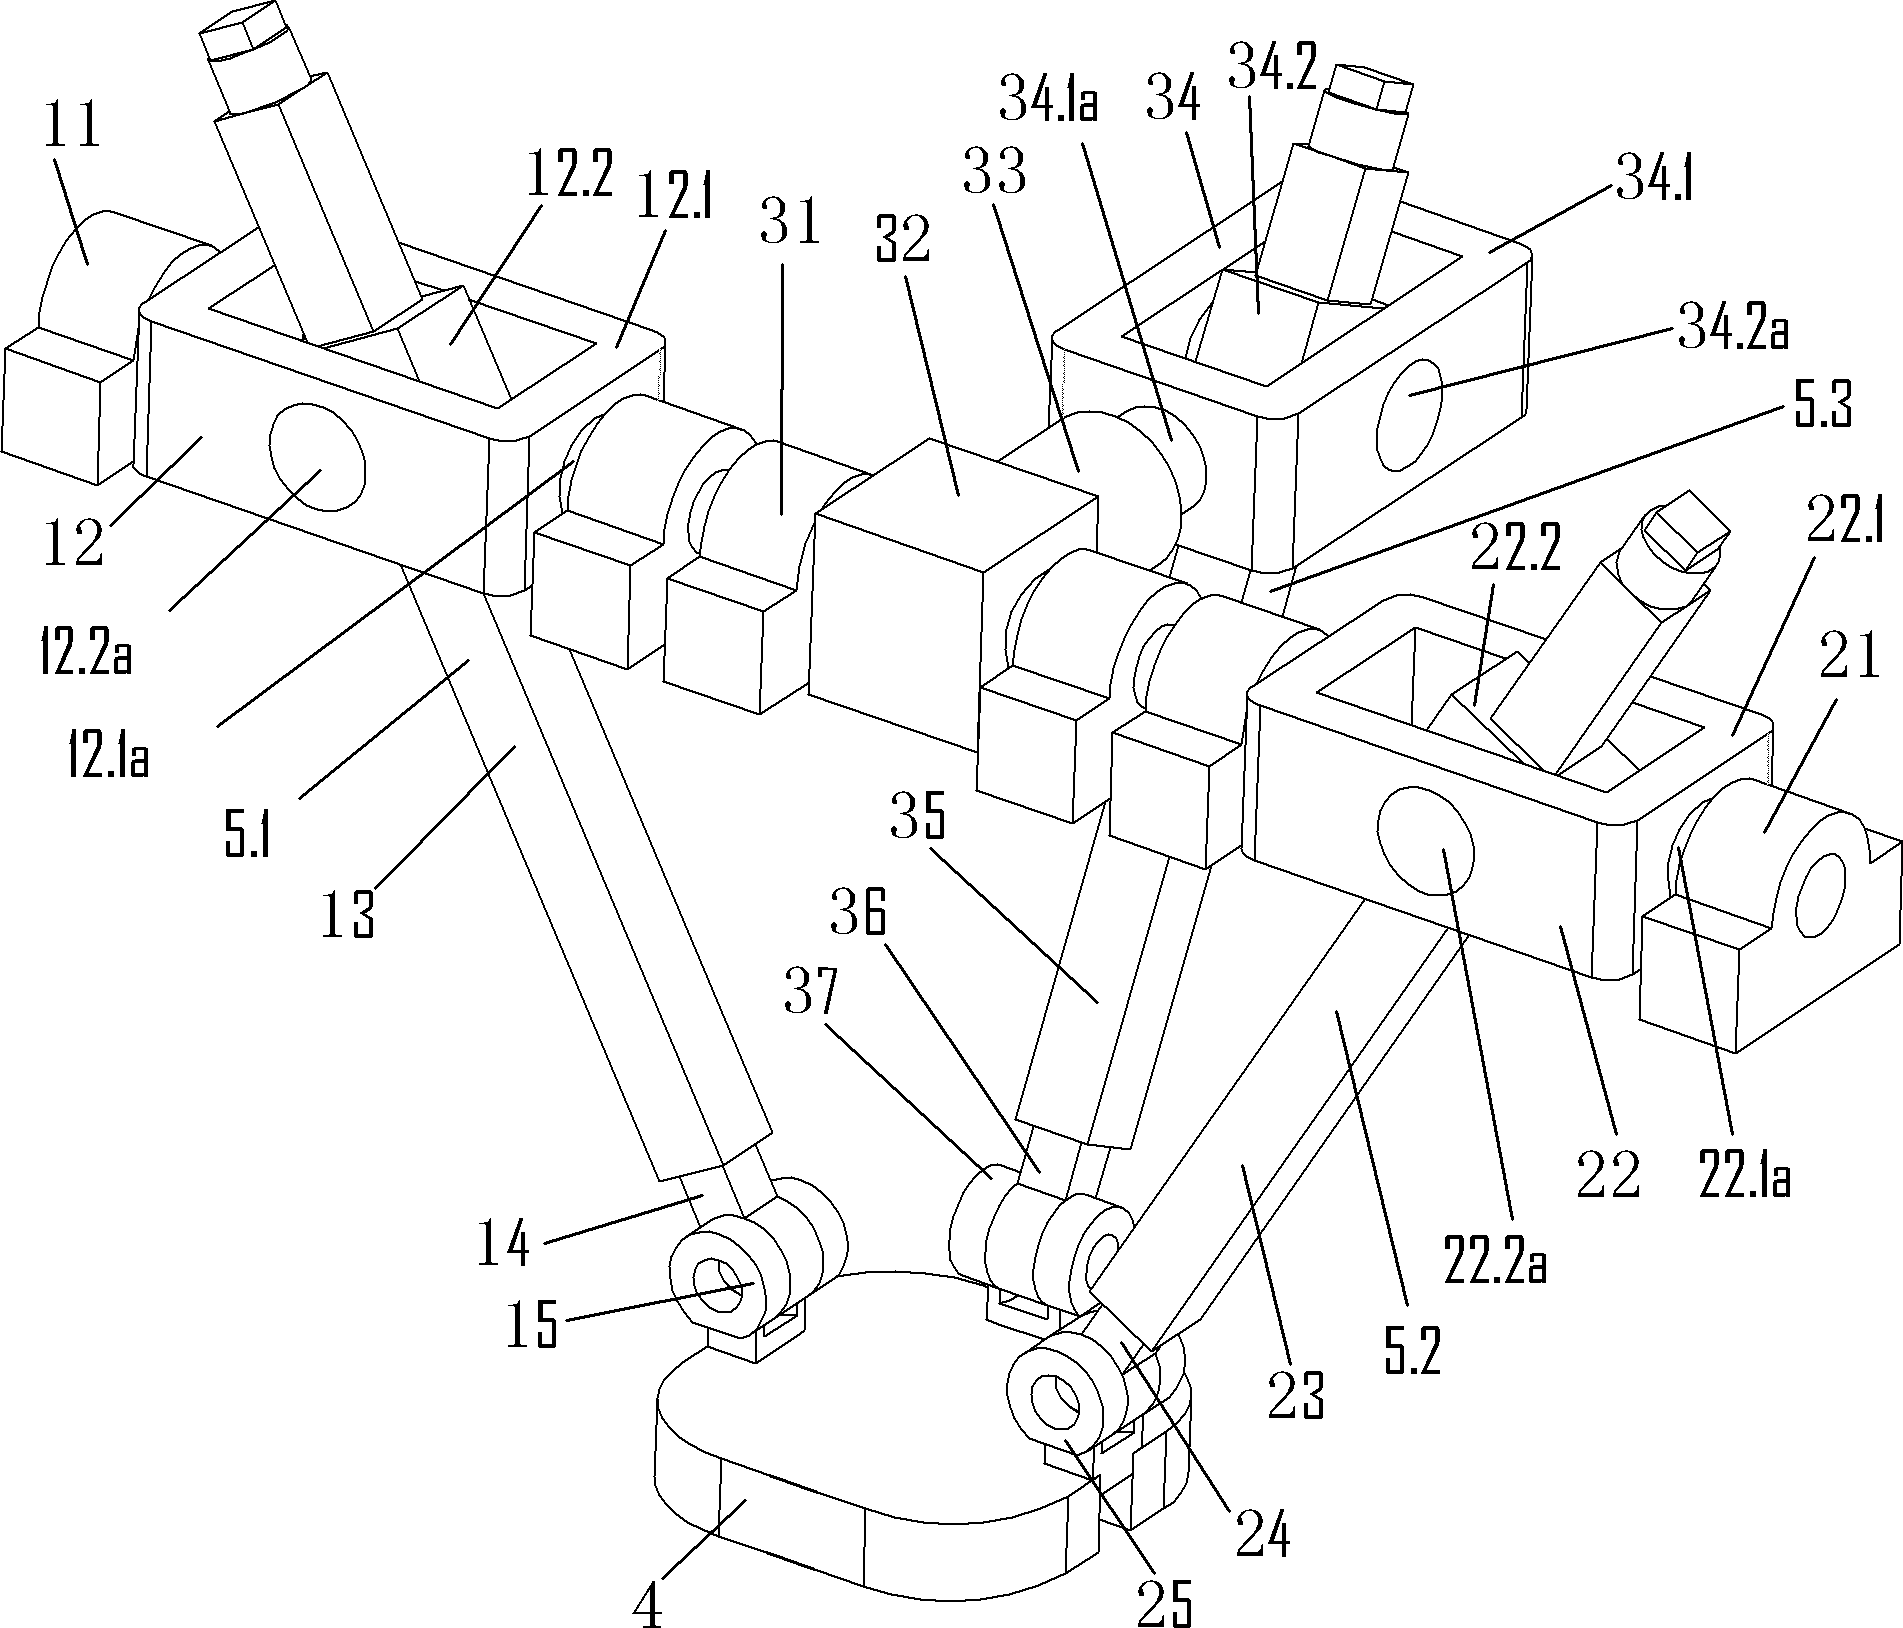 Three- DOF (degree of freedom) parallel mechanism with two vertical intersecting rotating shafts